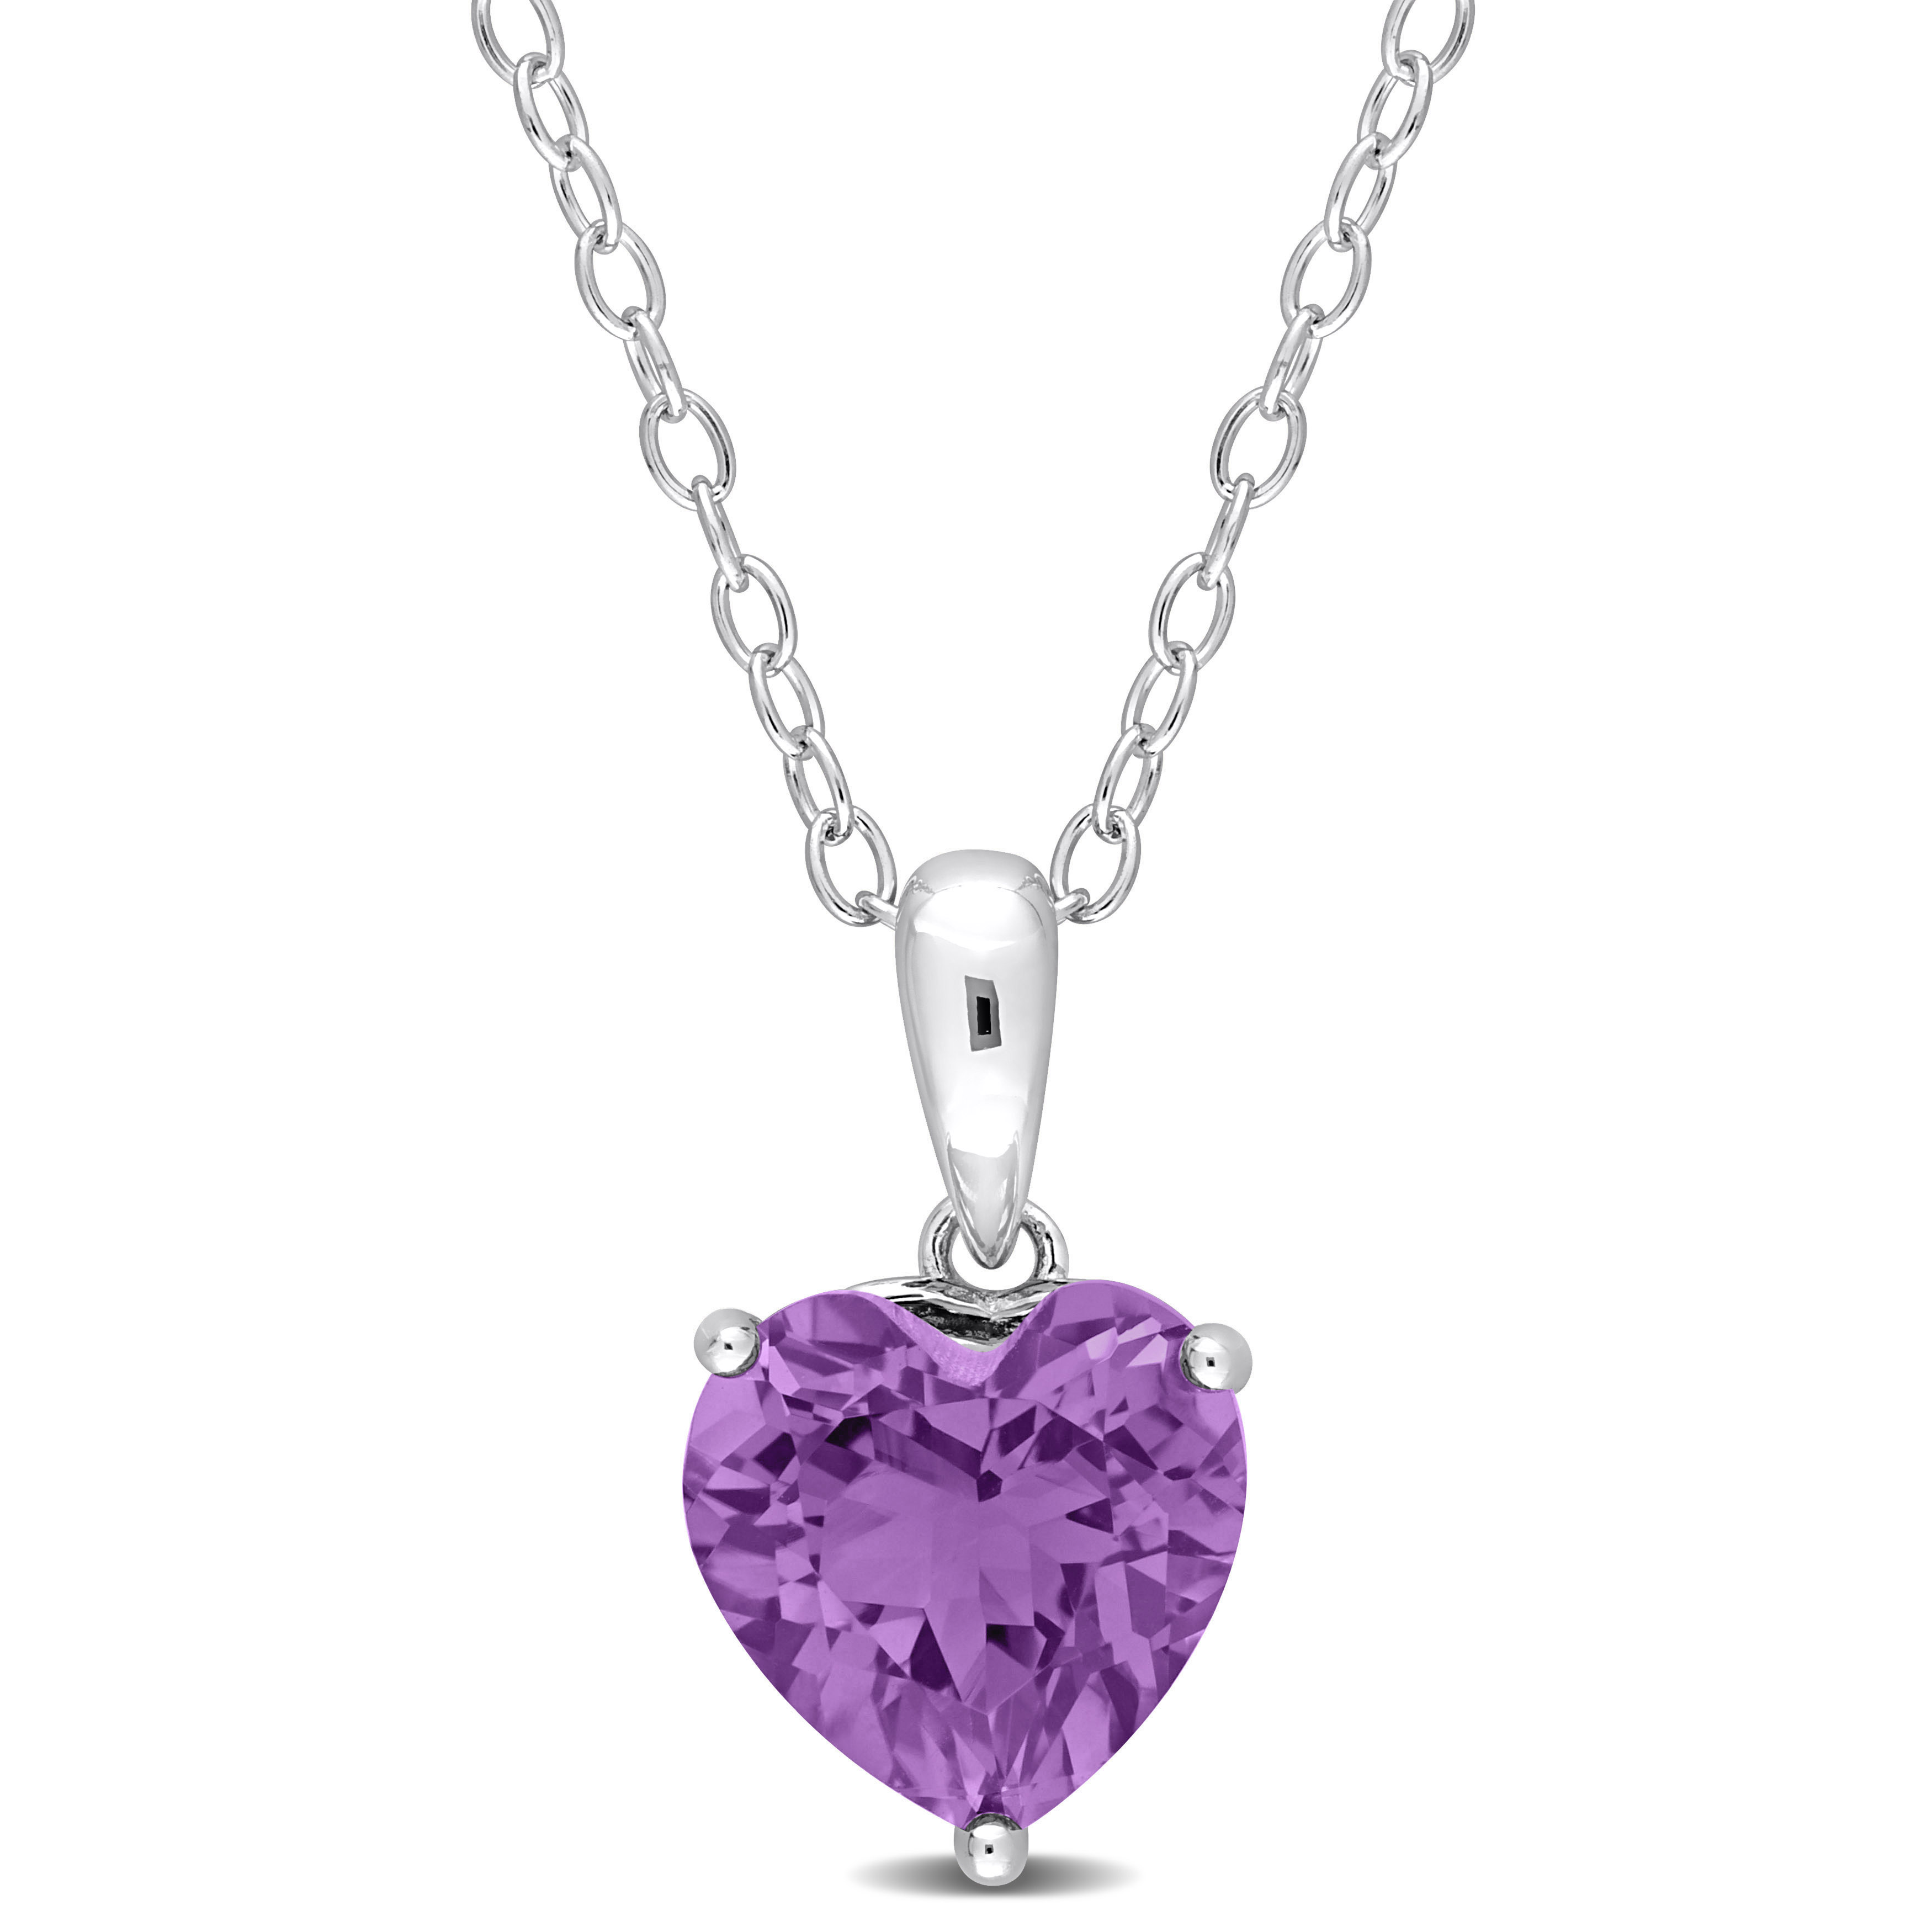 1 1/2 CT TGW Heart Shape Amethyst Solitaire Heart Design Pendant with Chain in Sterling Silver - 18 in.